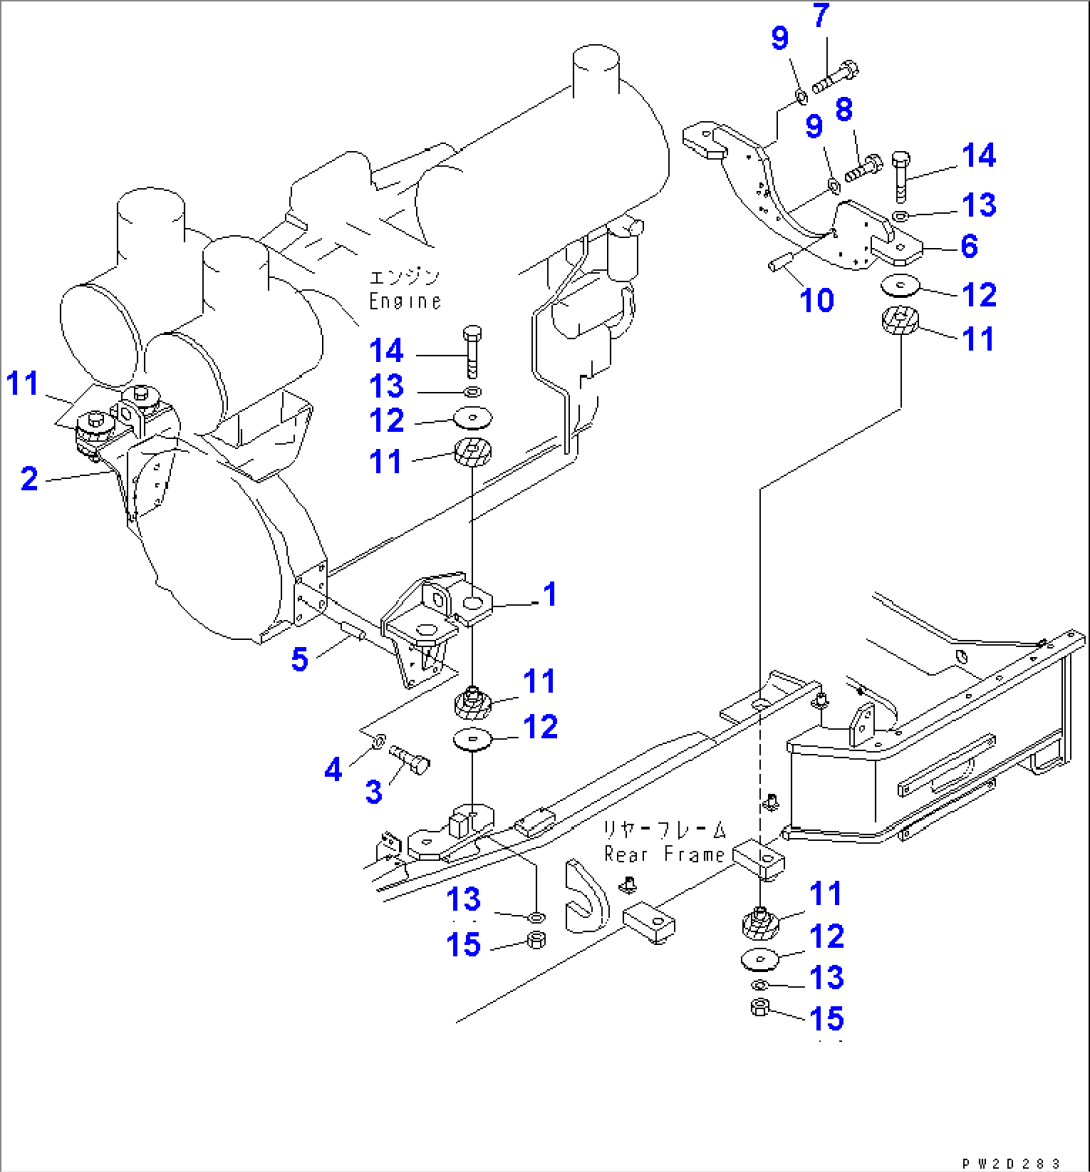 ENGINE MOUNTING (MOUNTING PARTS)(#51001-51074)